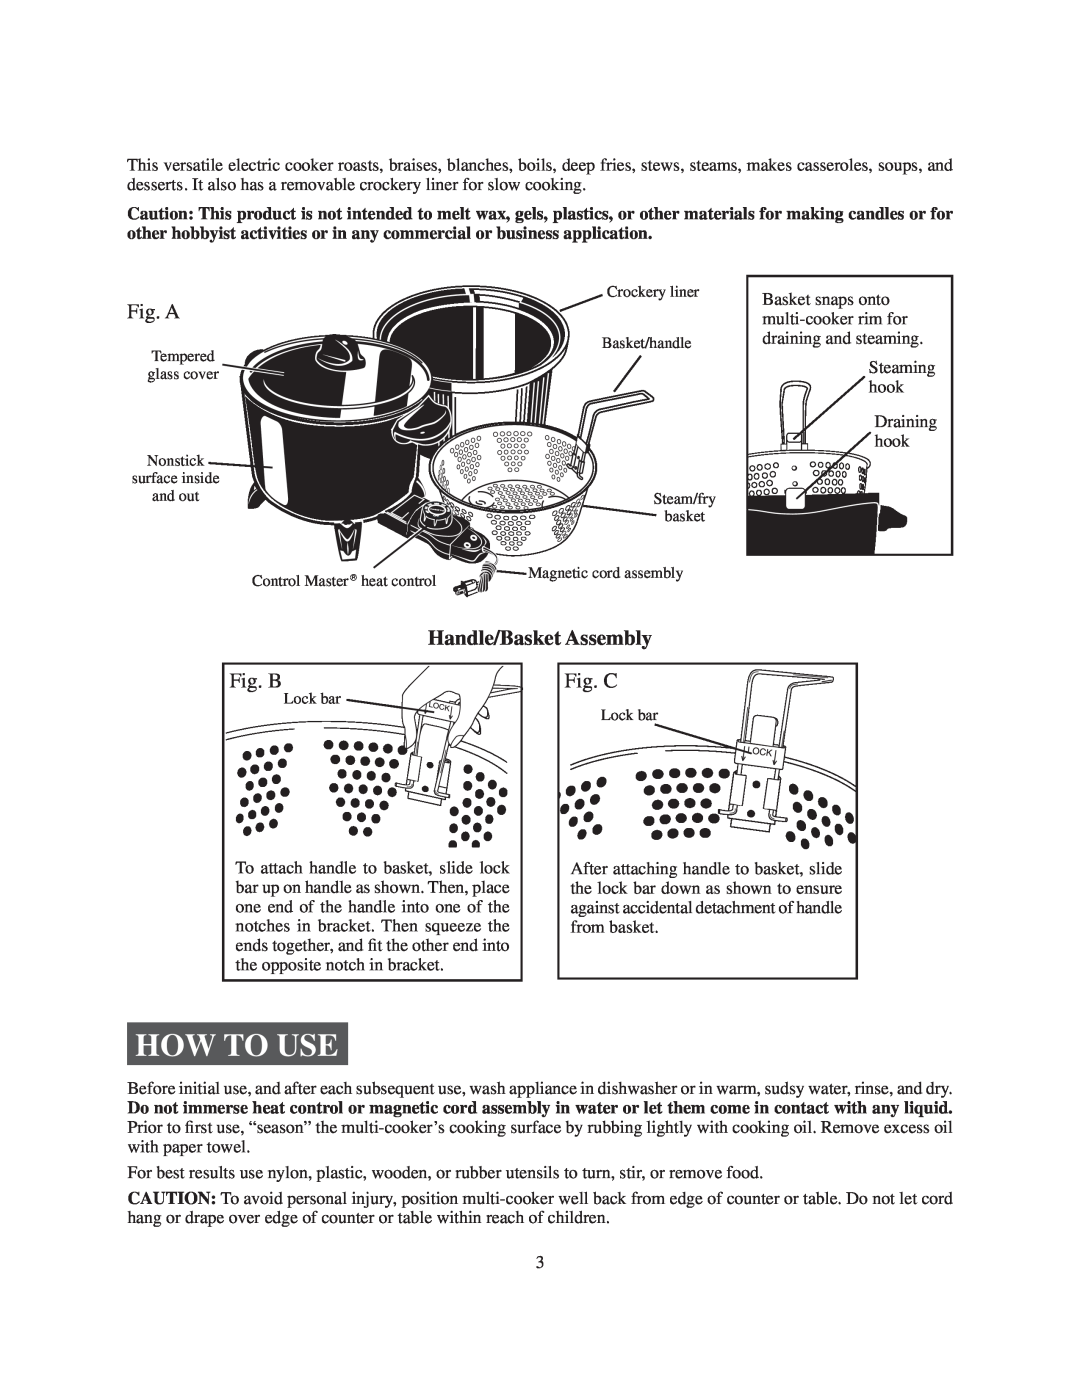 Presto Electric multi-cooker manual How To Use, Fig. A, Handle/Basket Assembly, Fig. B, Fig. C 